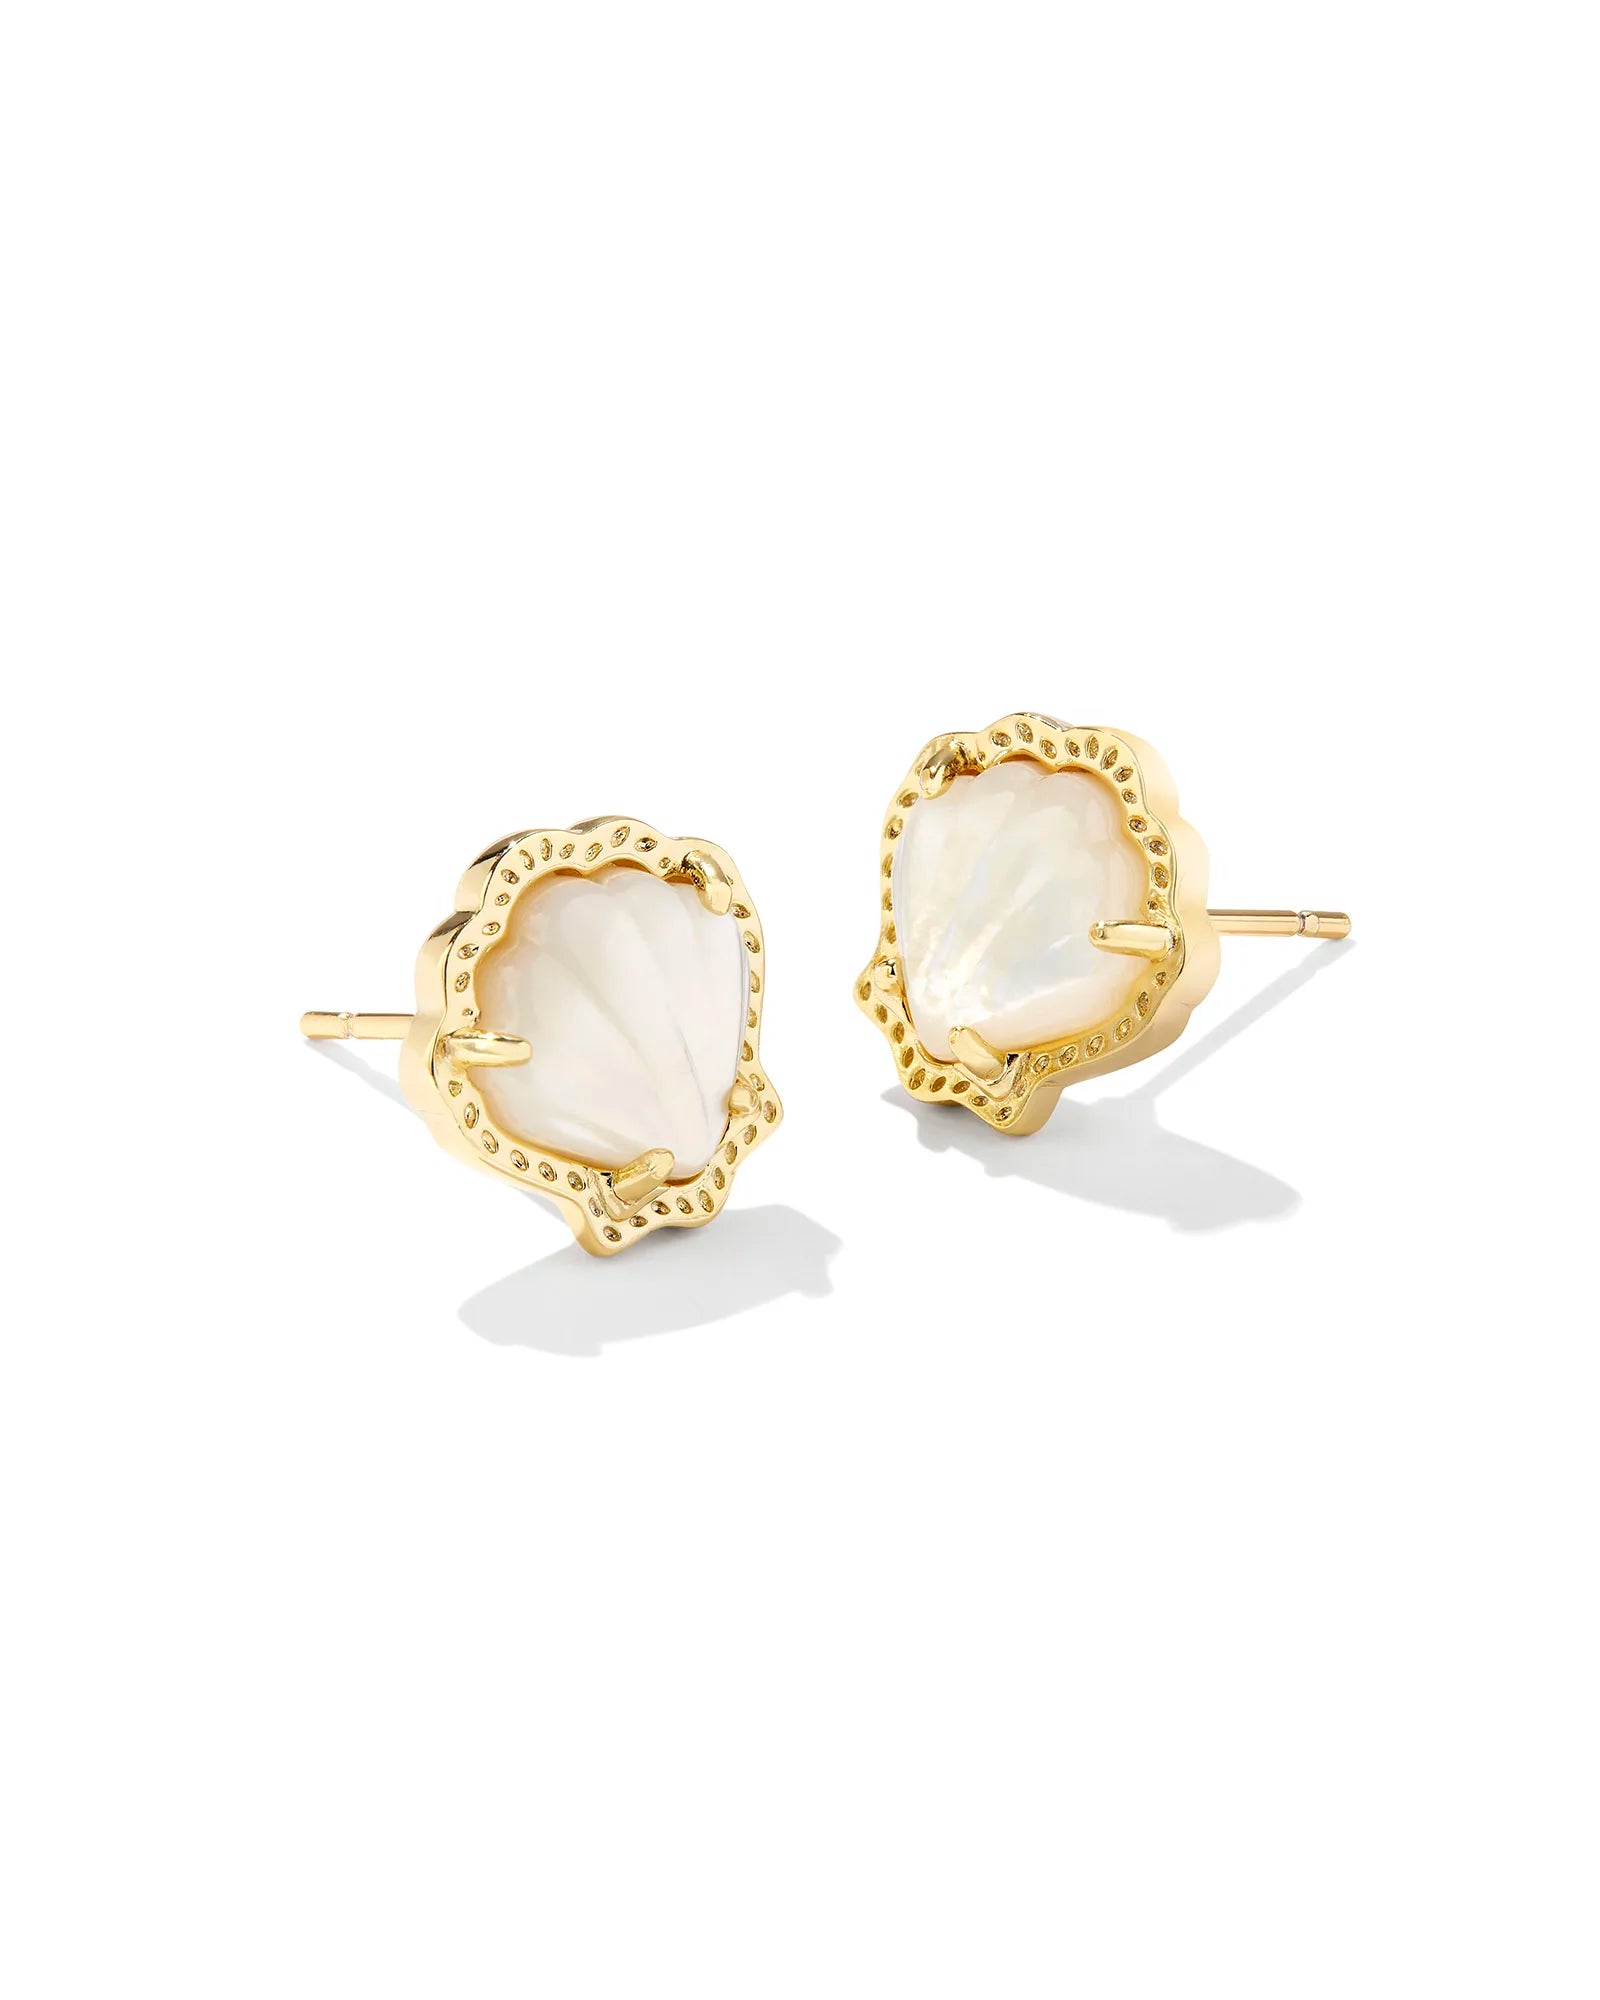 BRYNNE SHELL STUD EARRINGS - GOLD IVORY MOTHER OF PEARL